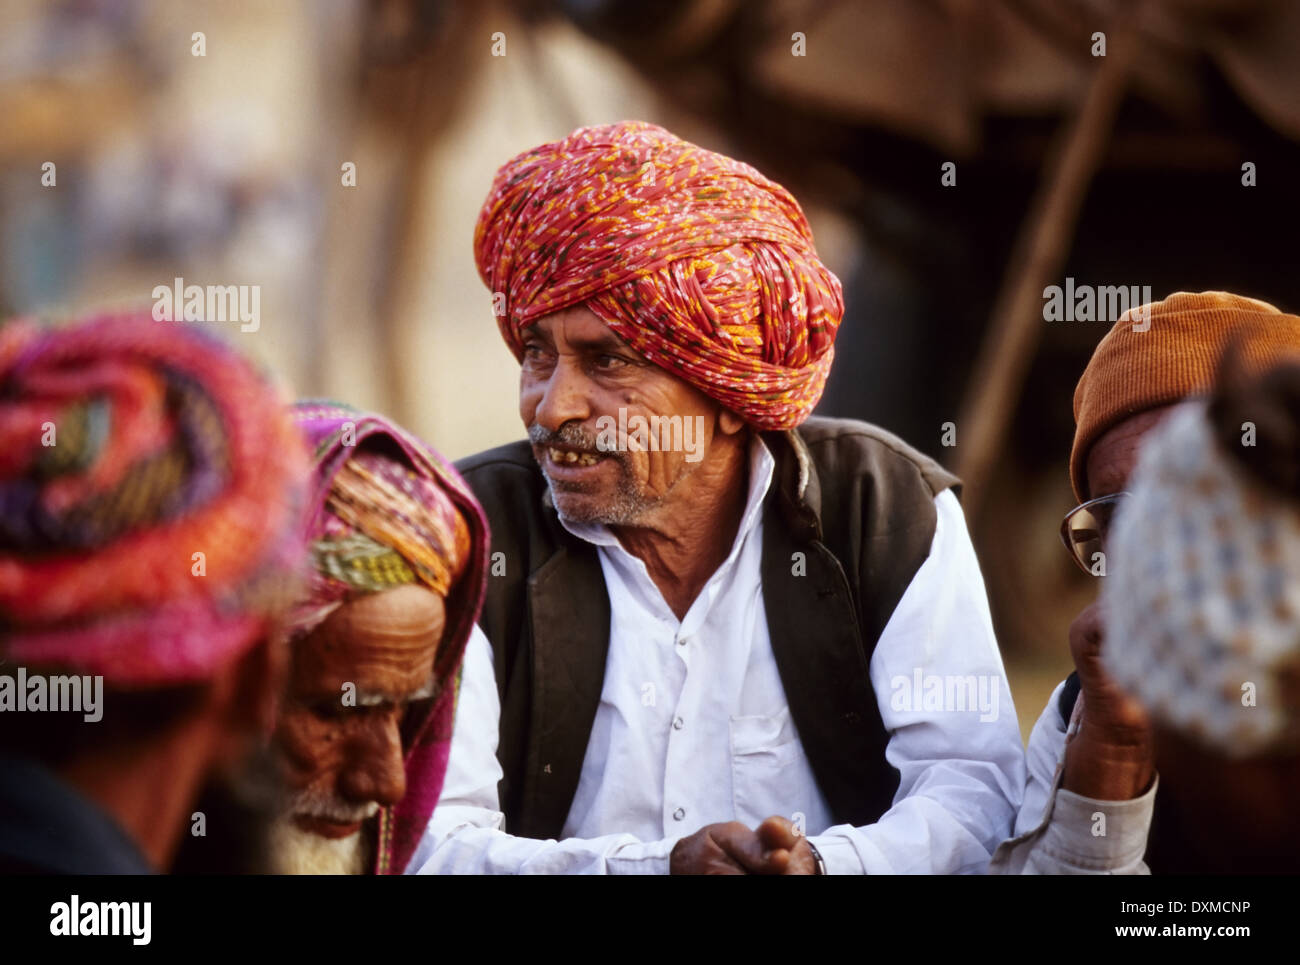 Indian man wearing a red and orange turban in a group of men Stock Photo